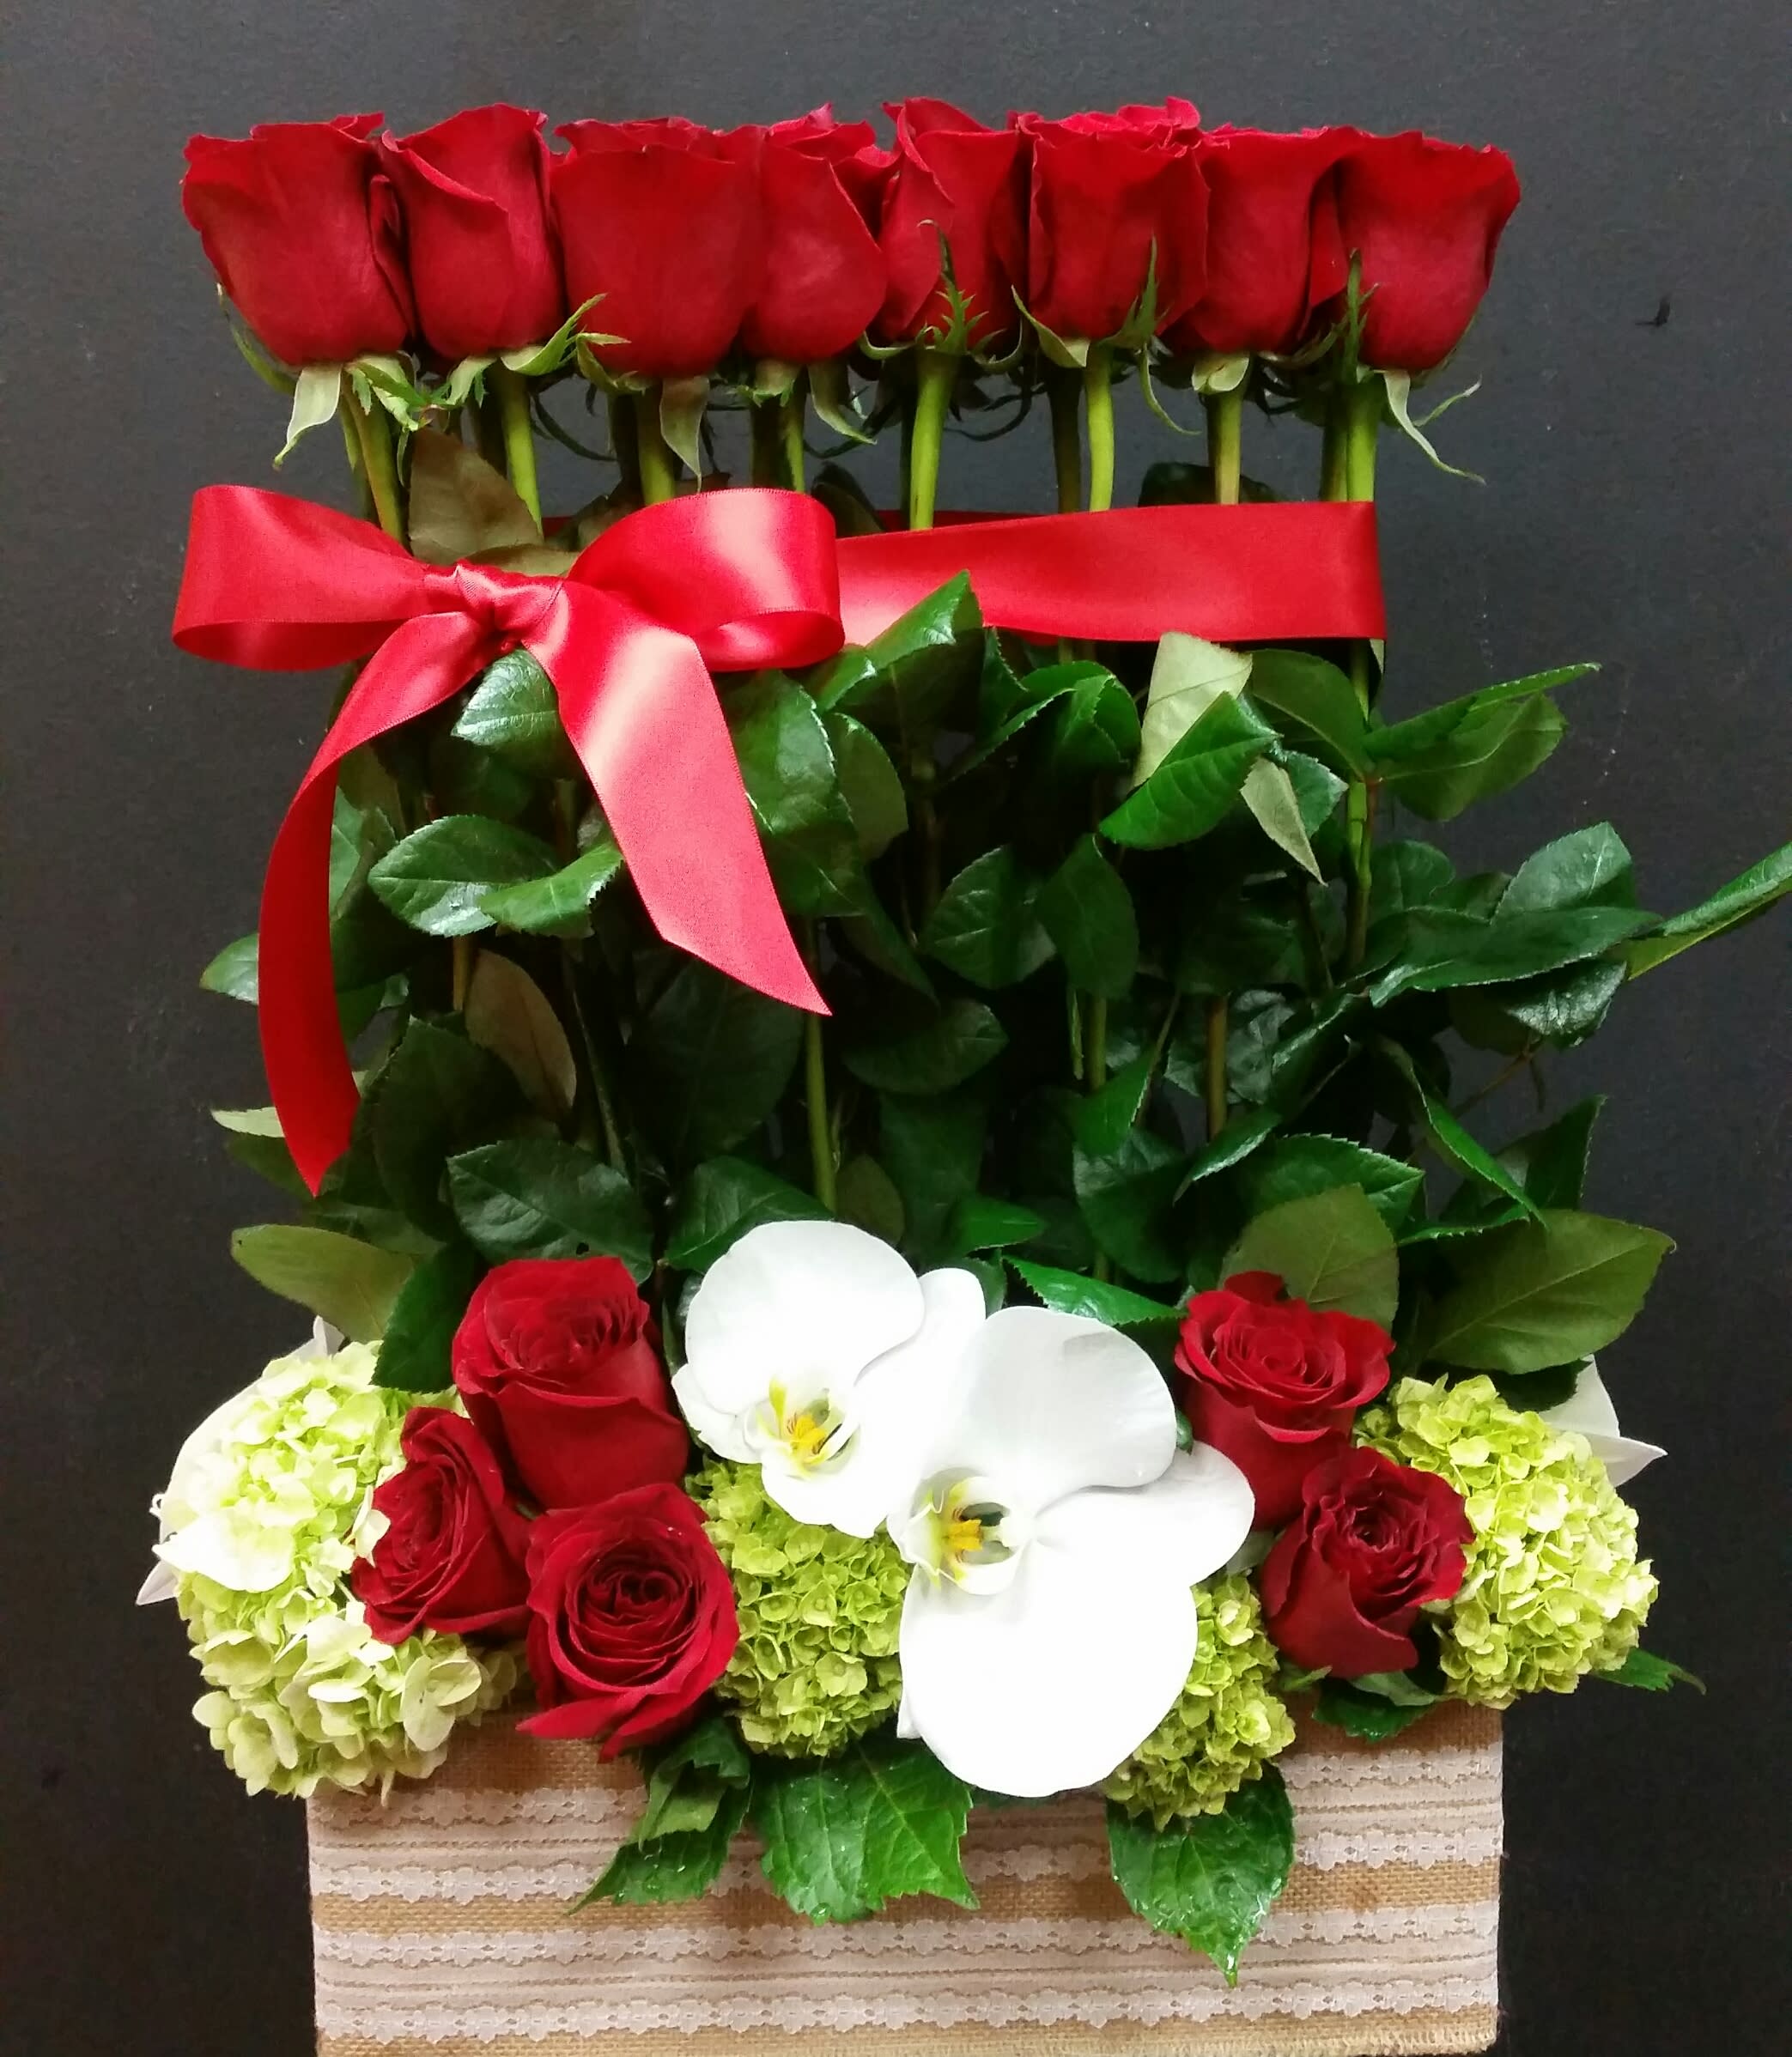 Celebrate your special day  - 2dozen red roses in the vintage look container with supporting flowers added